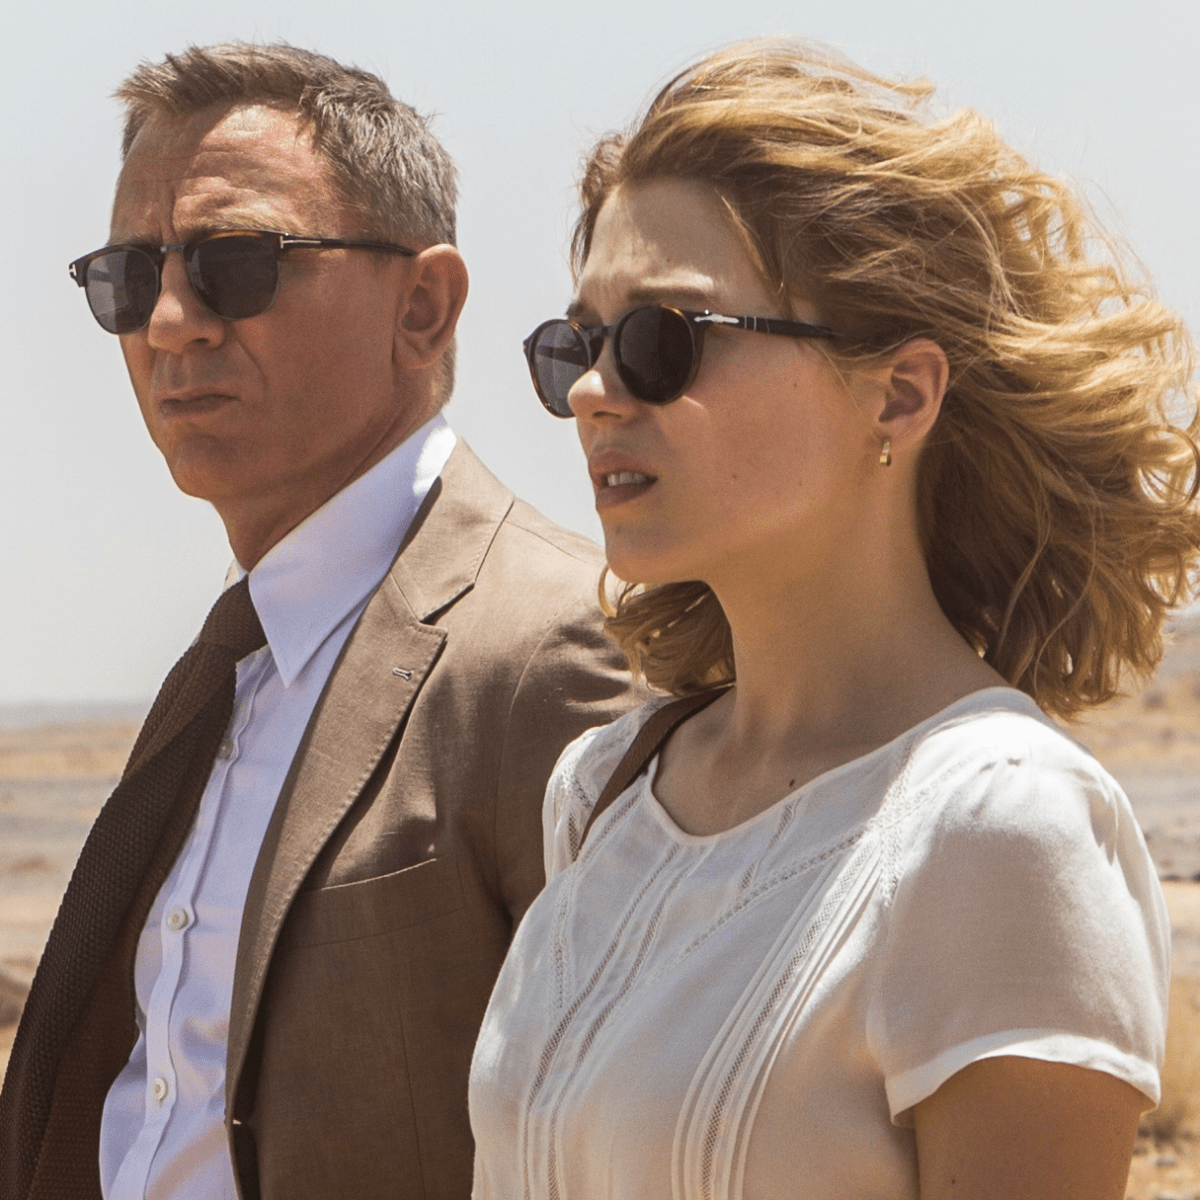 James 'Spectre' Sunglasses Are What You Wearing This Summer - Airows